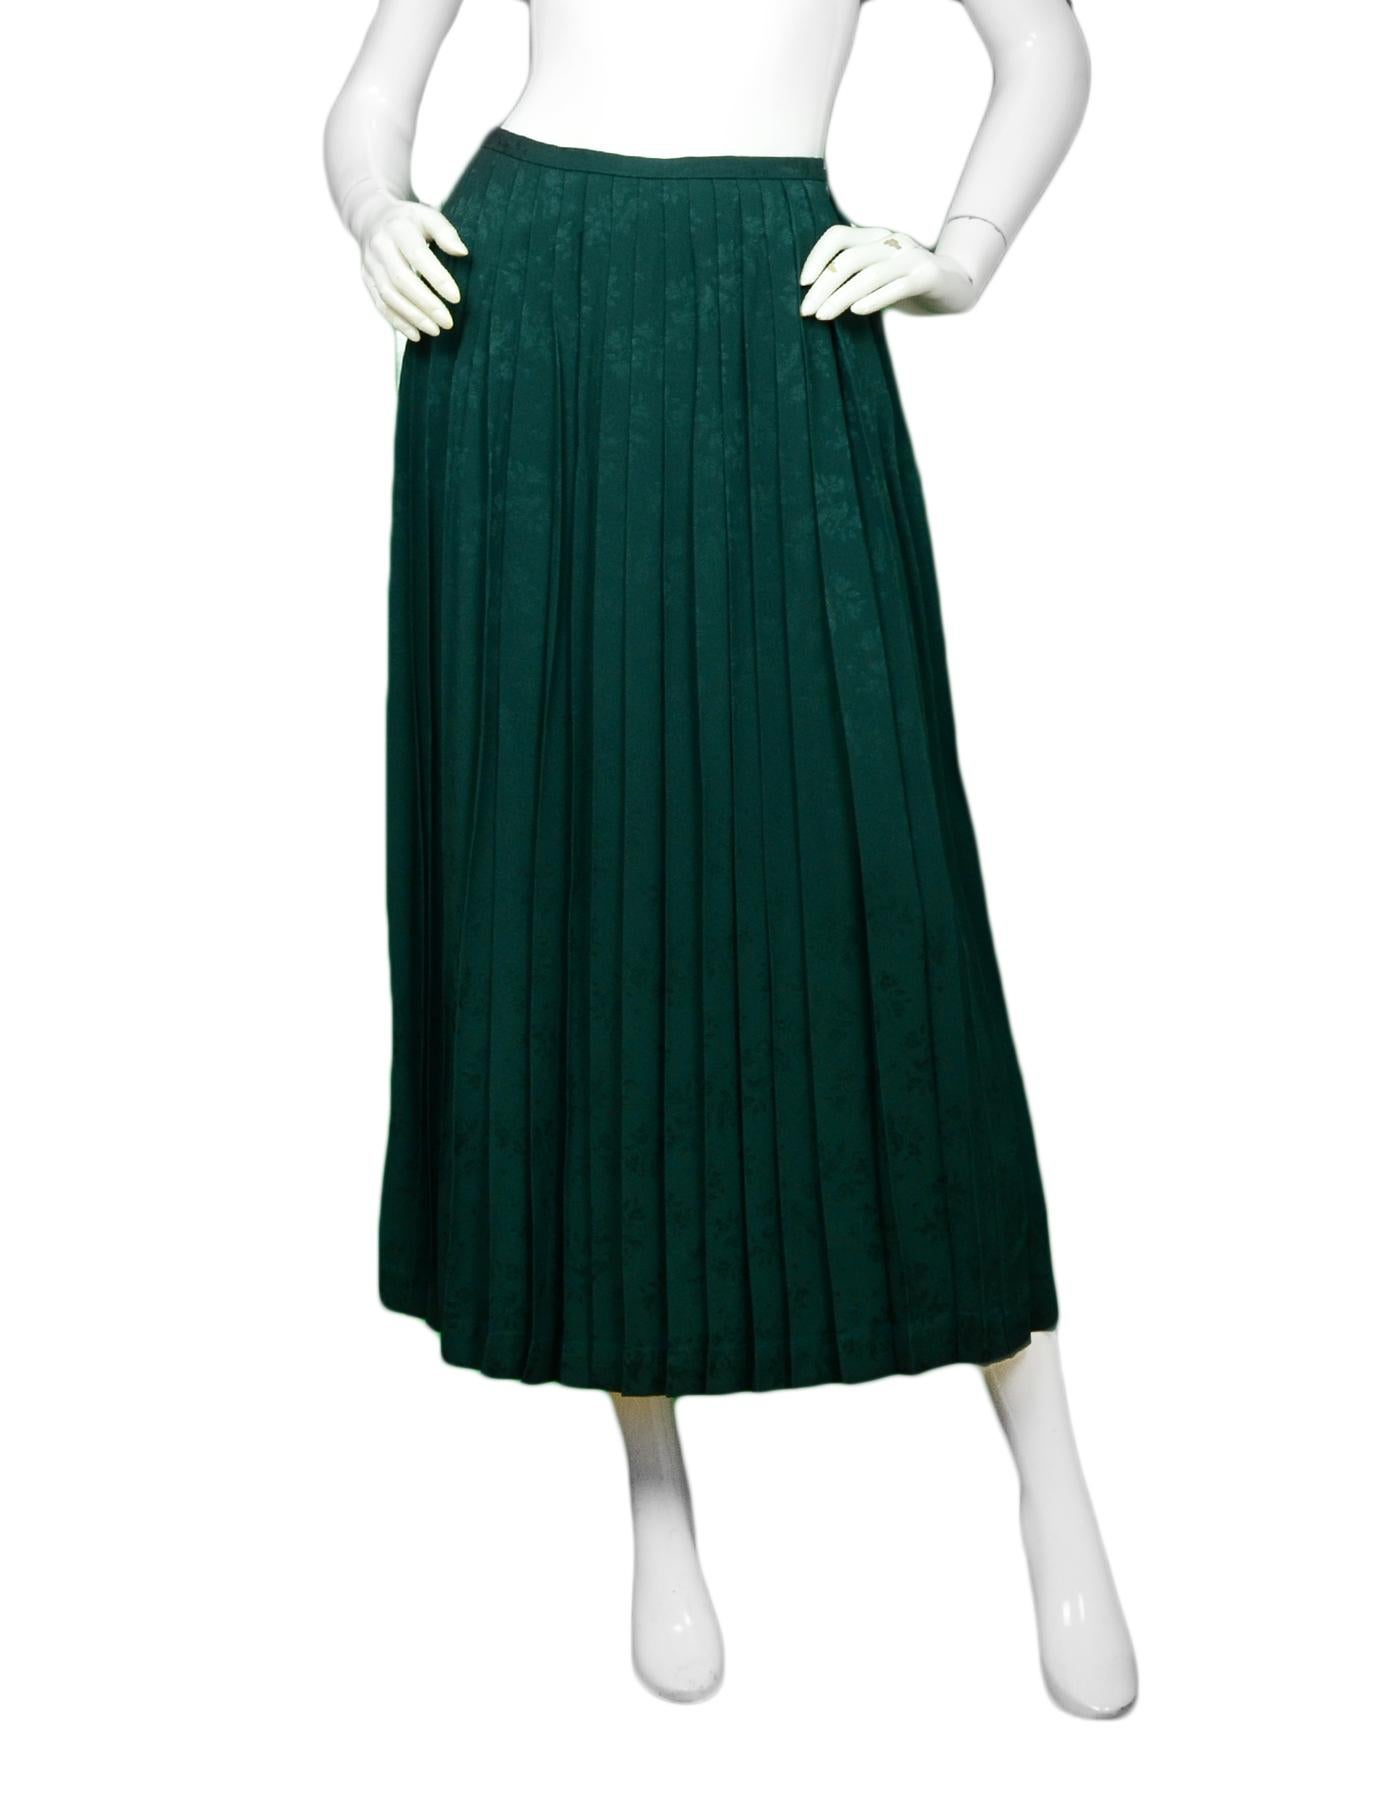 Vilshenko Green Beatrix Pleated Crepe-Jacquard Midi Skirt sz 0

Made In: UK
Color: Green
Materials: 70% Acetate, 30% Viscose
Trim: 100% Rayon
Closure/Opening: Side zip
Overall Condition: New with tag, NWT
Estimated Retail: $749 + tax
Includes: